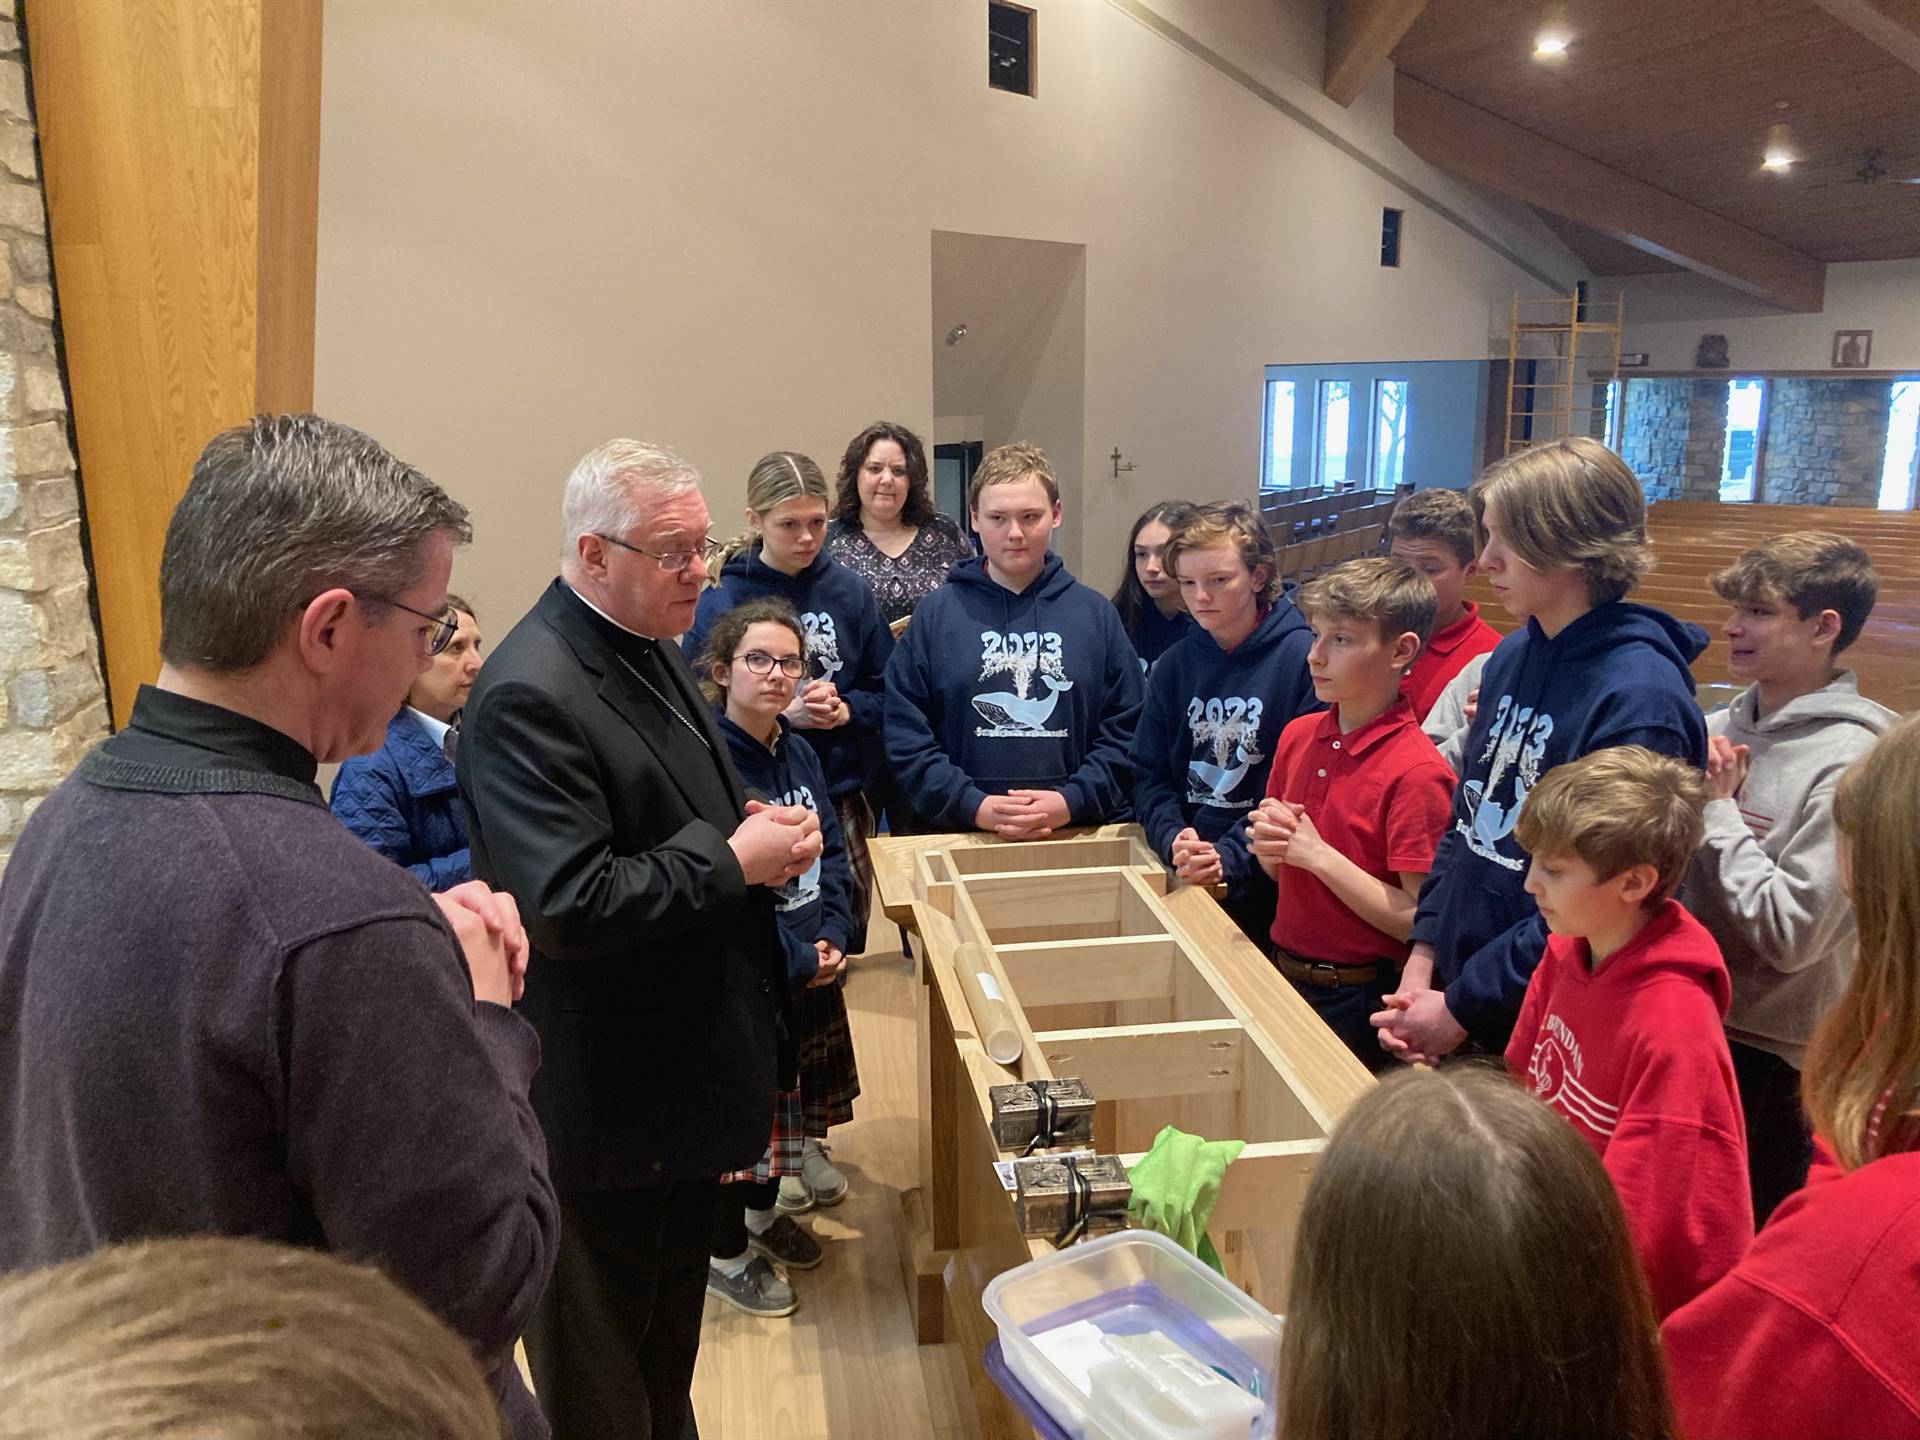 Bishop Woost and Fr. Tom explain to 7/8 graders about the relics